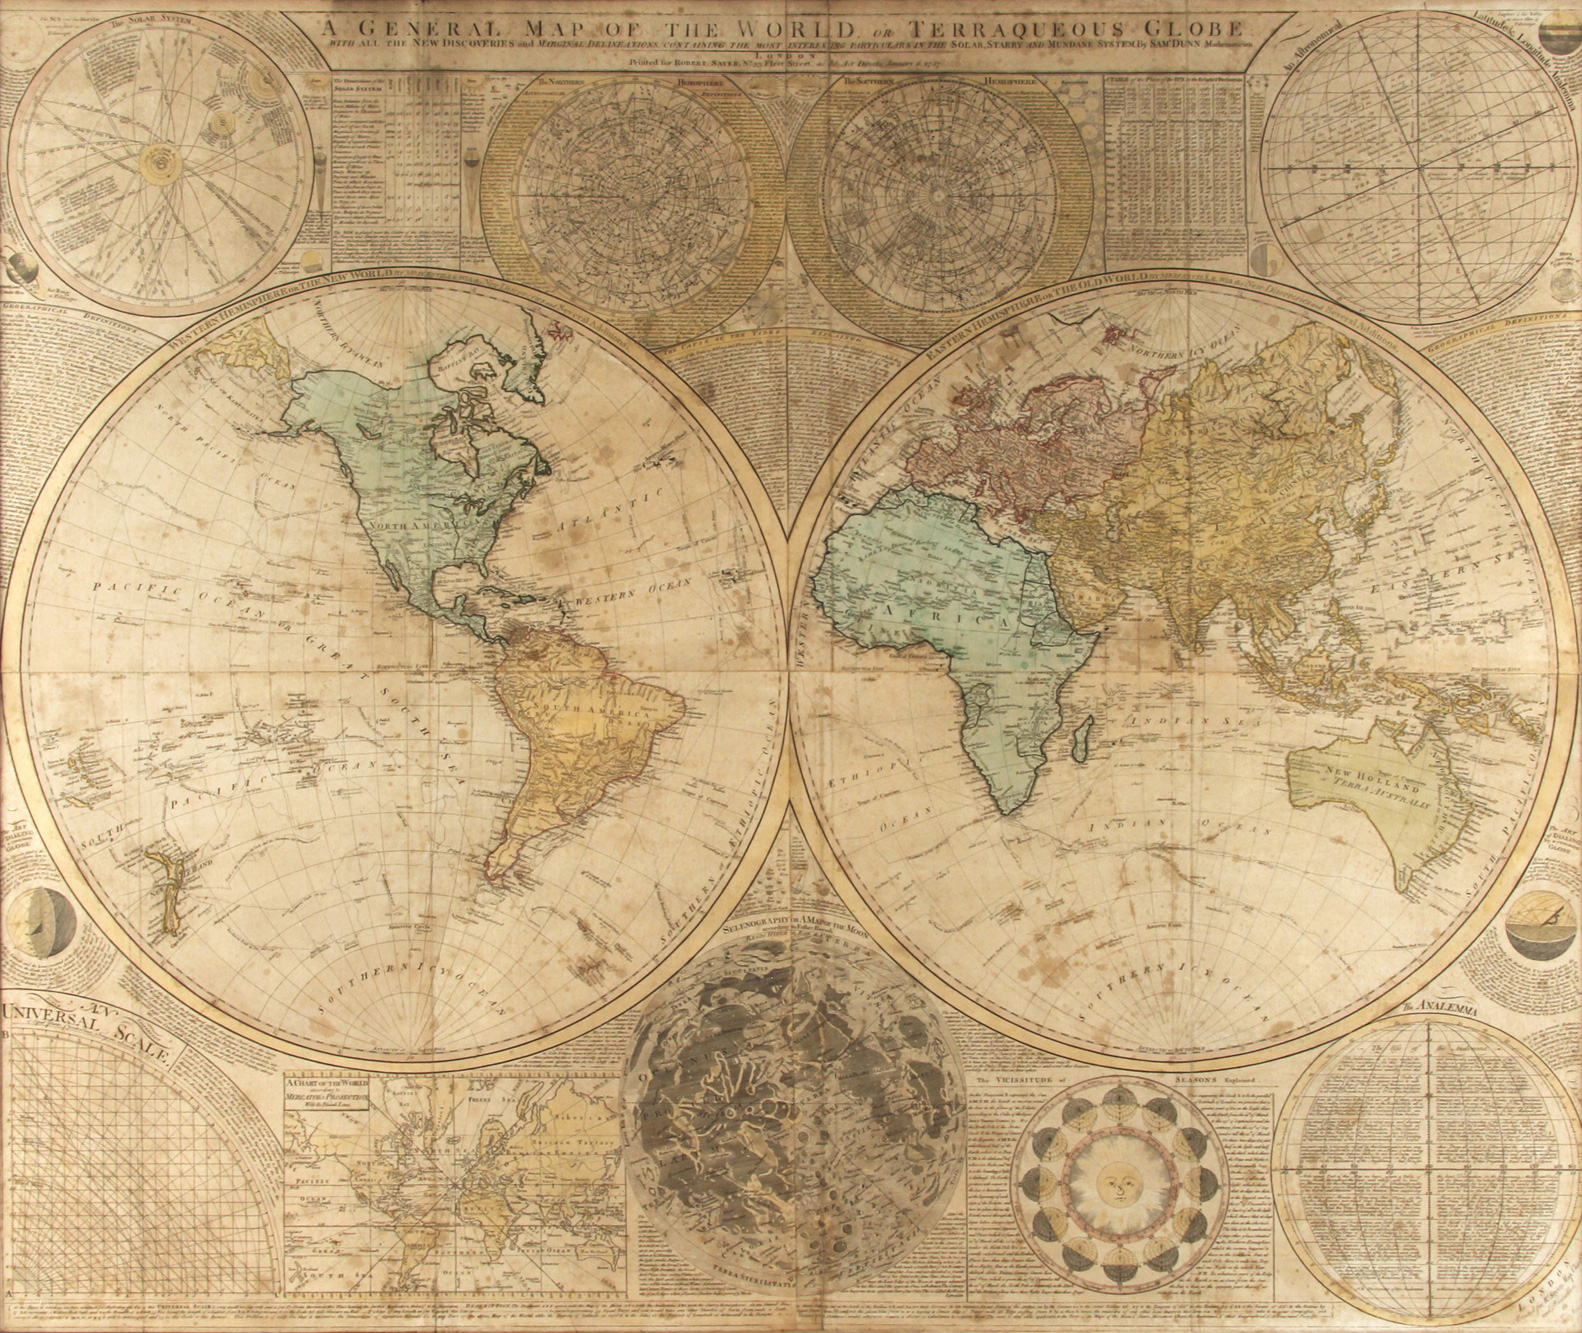  'A GENERAL MAP OF THE WORLD OR TERRAQUEOUS GLOBE'